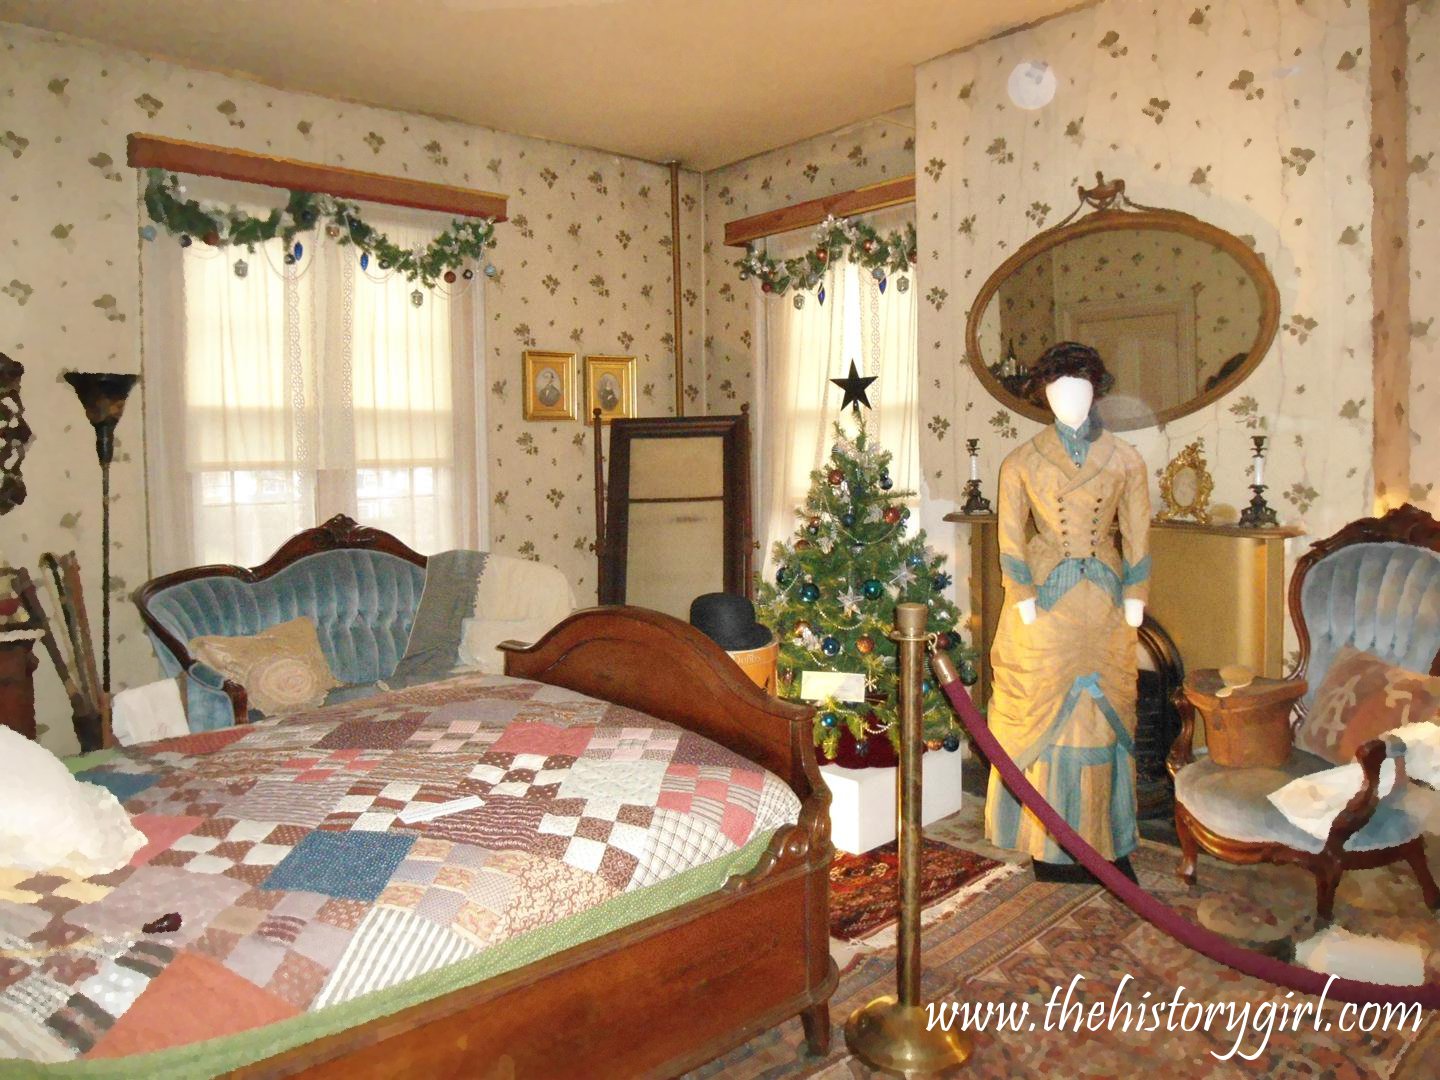 ... master bedroom, with original acorn-themed wallpaper, dating to 1860